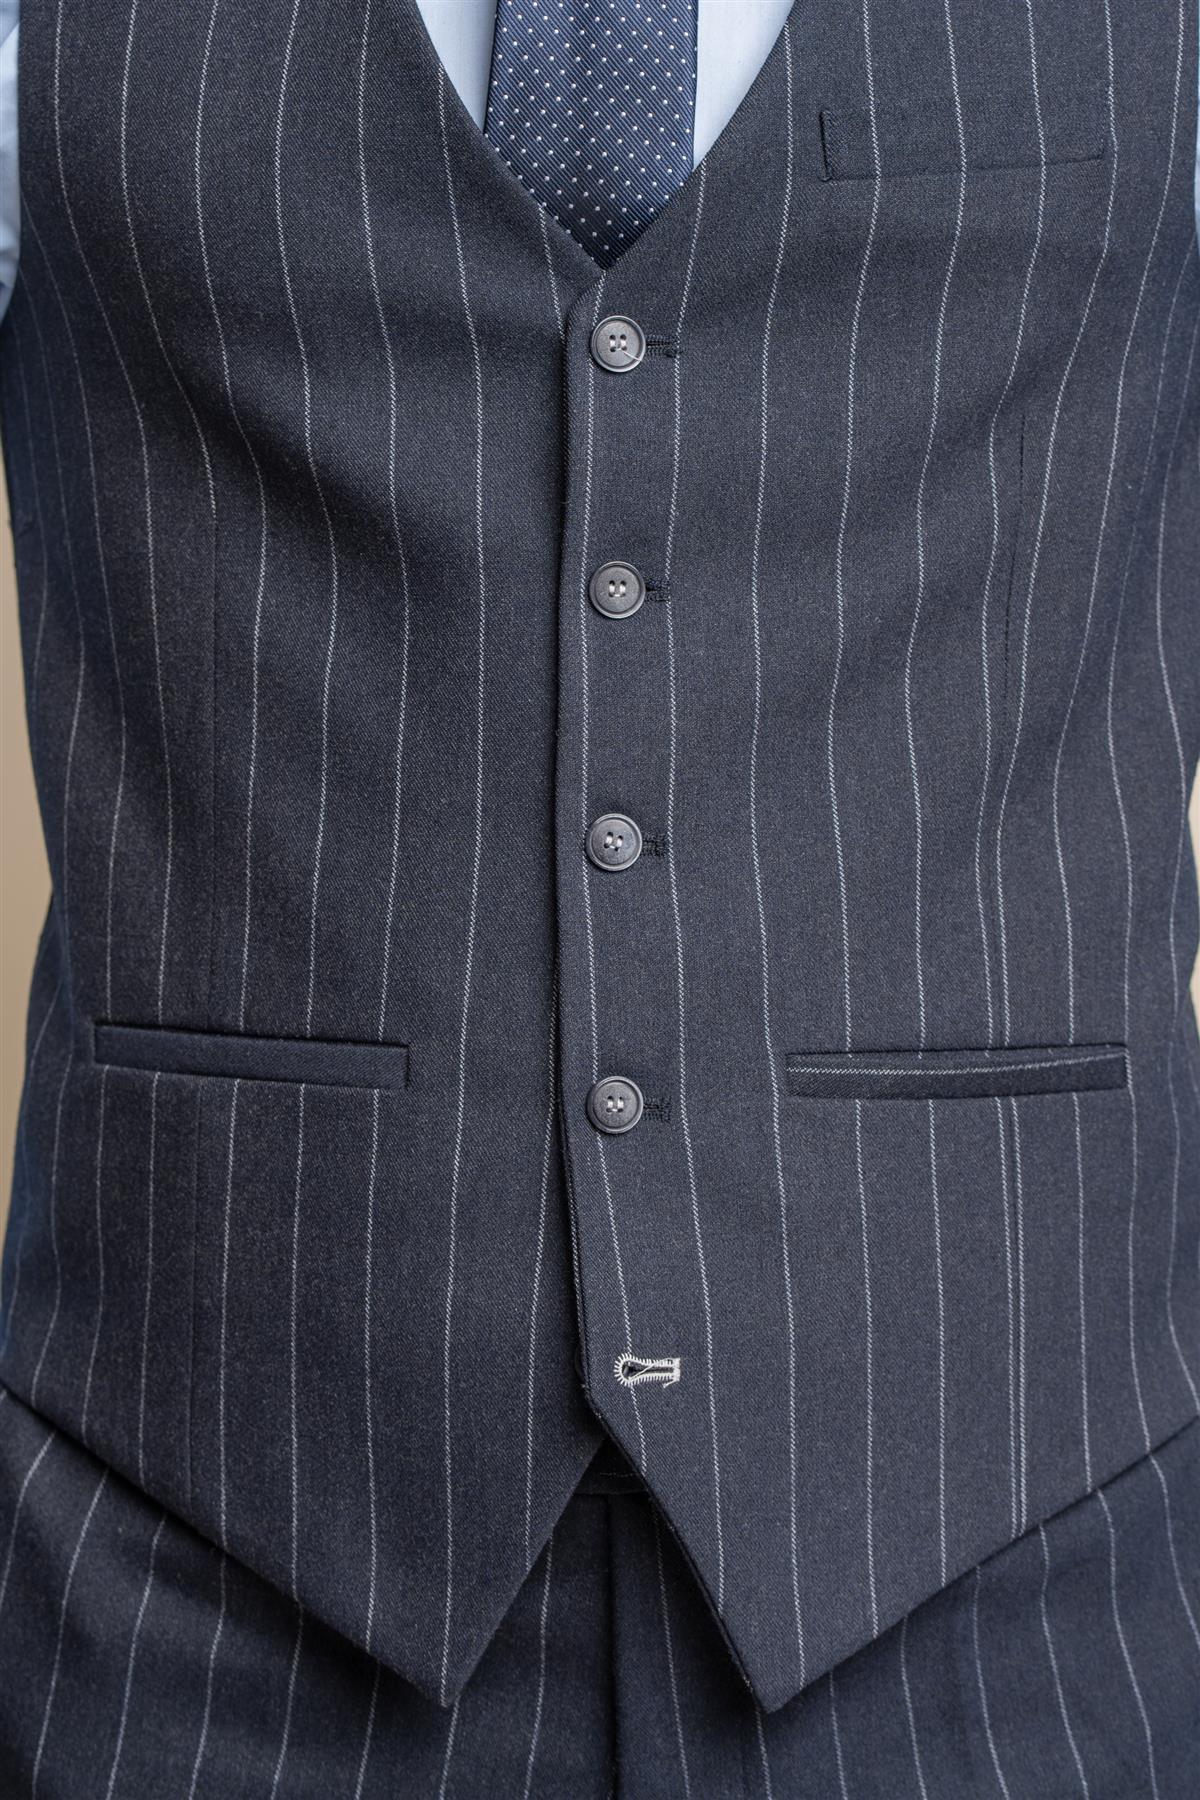 Invincible striped waistcoat front detail